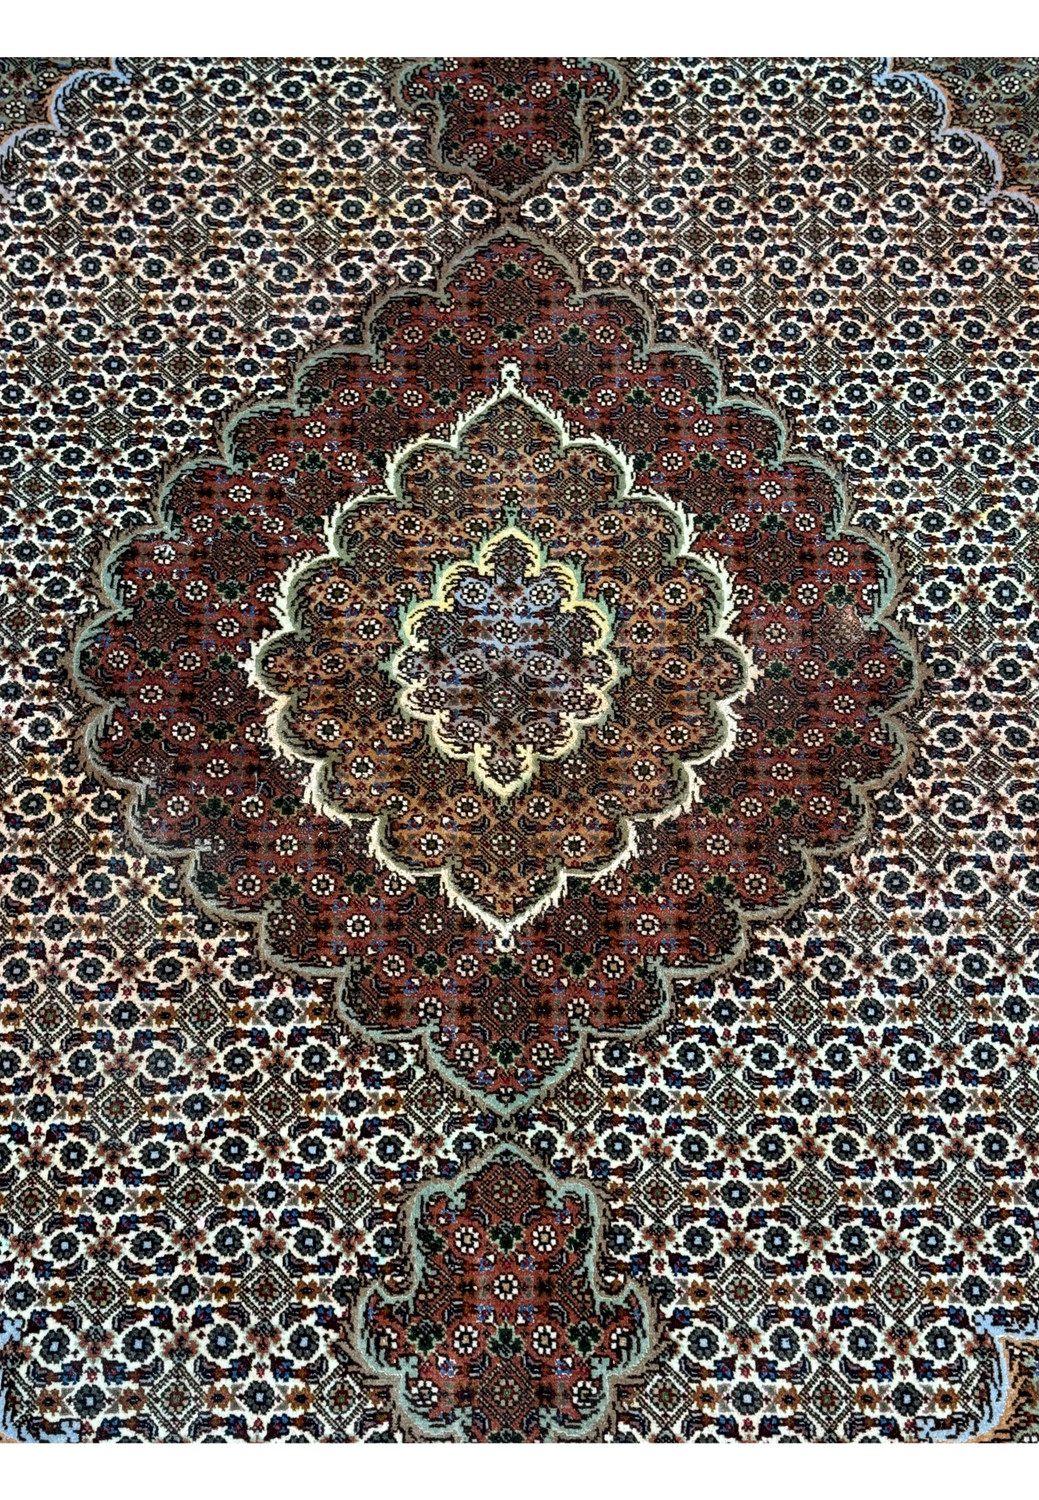 Detailed view of the central medallion of a Persian Tabriz Mahi rug, emphasizing the dense floral pattern and rich color palette on a dark field, with highlights of silk giving a subtle sheen.